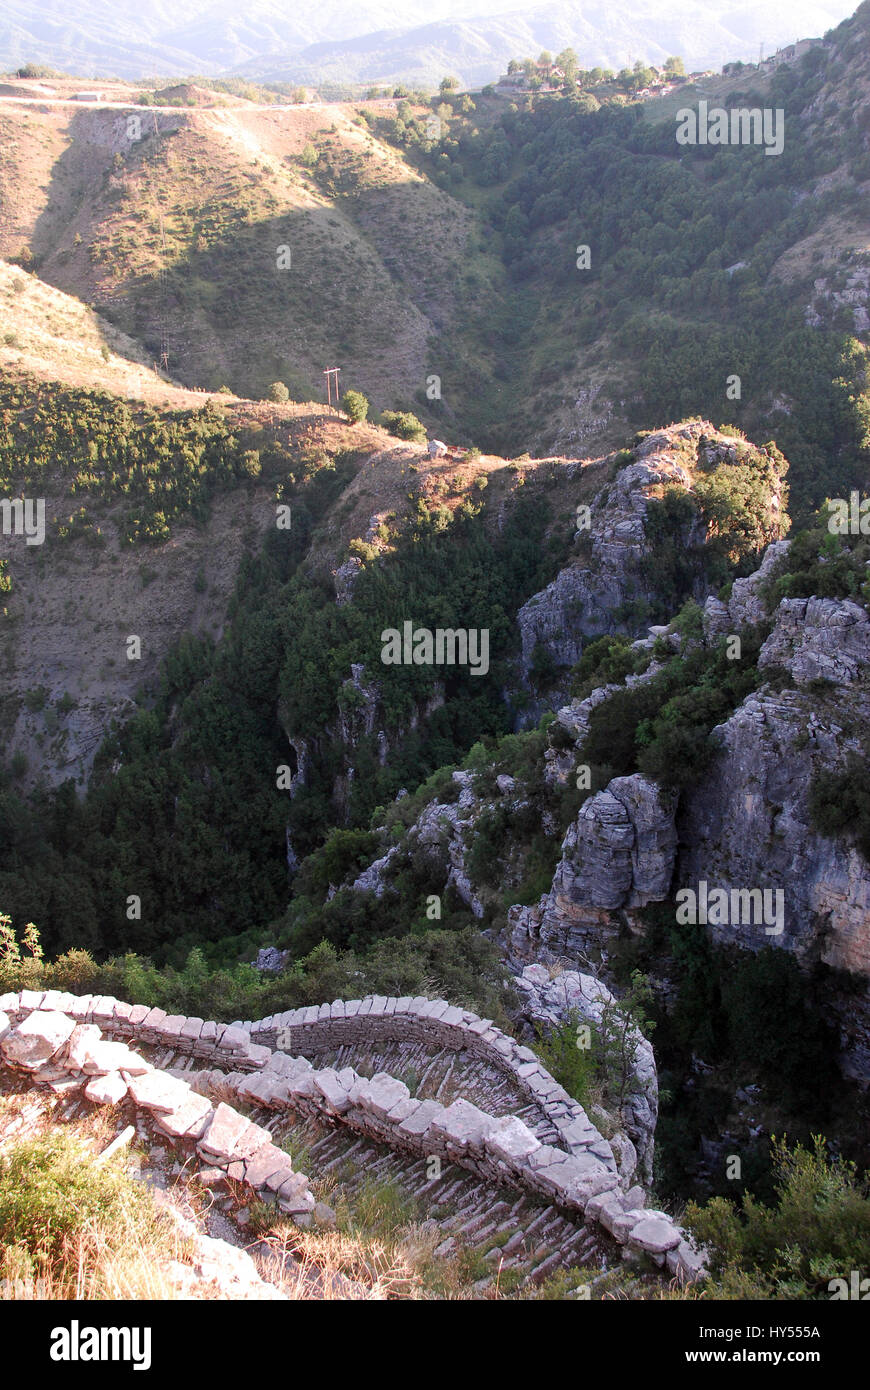 The giant stone steps of Vradeto village and the Beloi viewpoint 0f Vicos Canyon, Zagoria villages, Epirus region, Greece Stock Photo